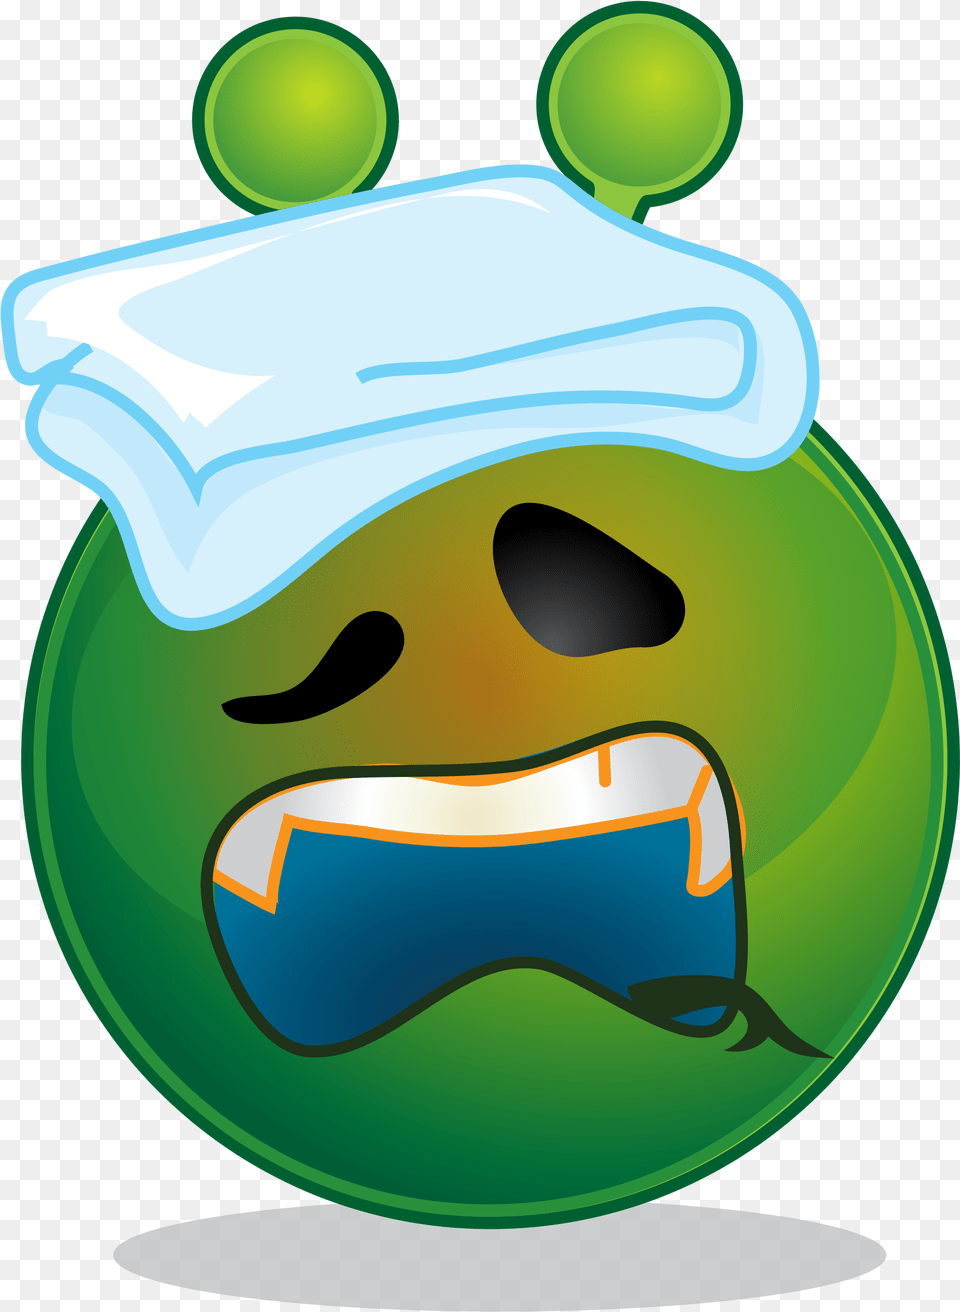 Collection Of Sick Cartoon Picture Imagen Enfermo Para Whatsapp, Sphere, Green Free Png